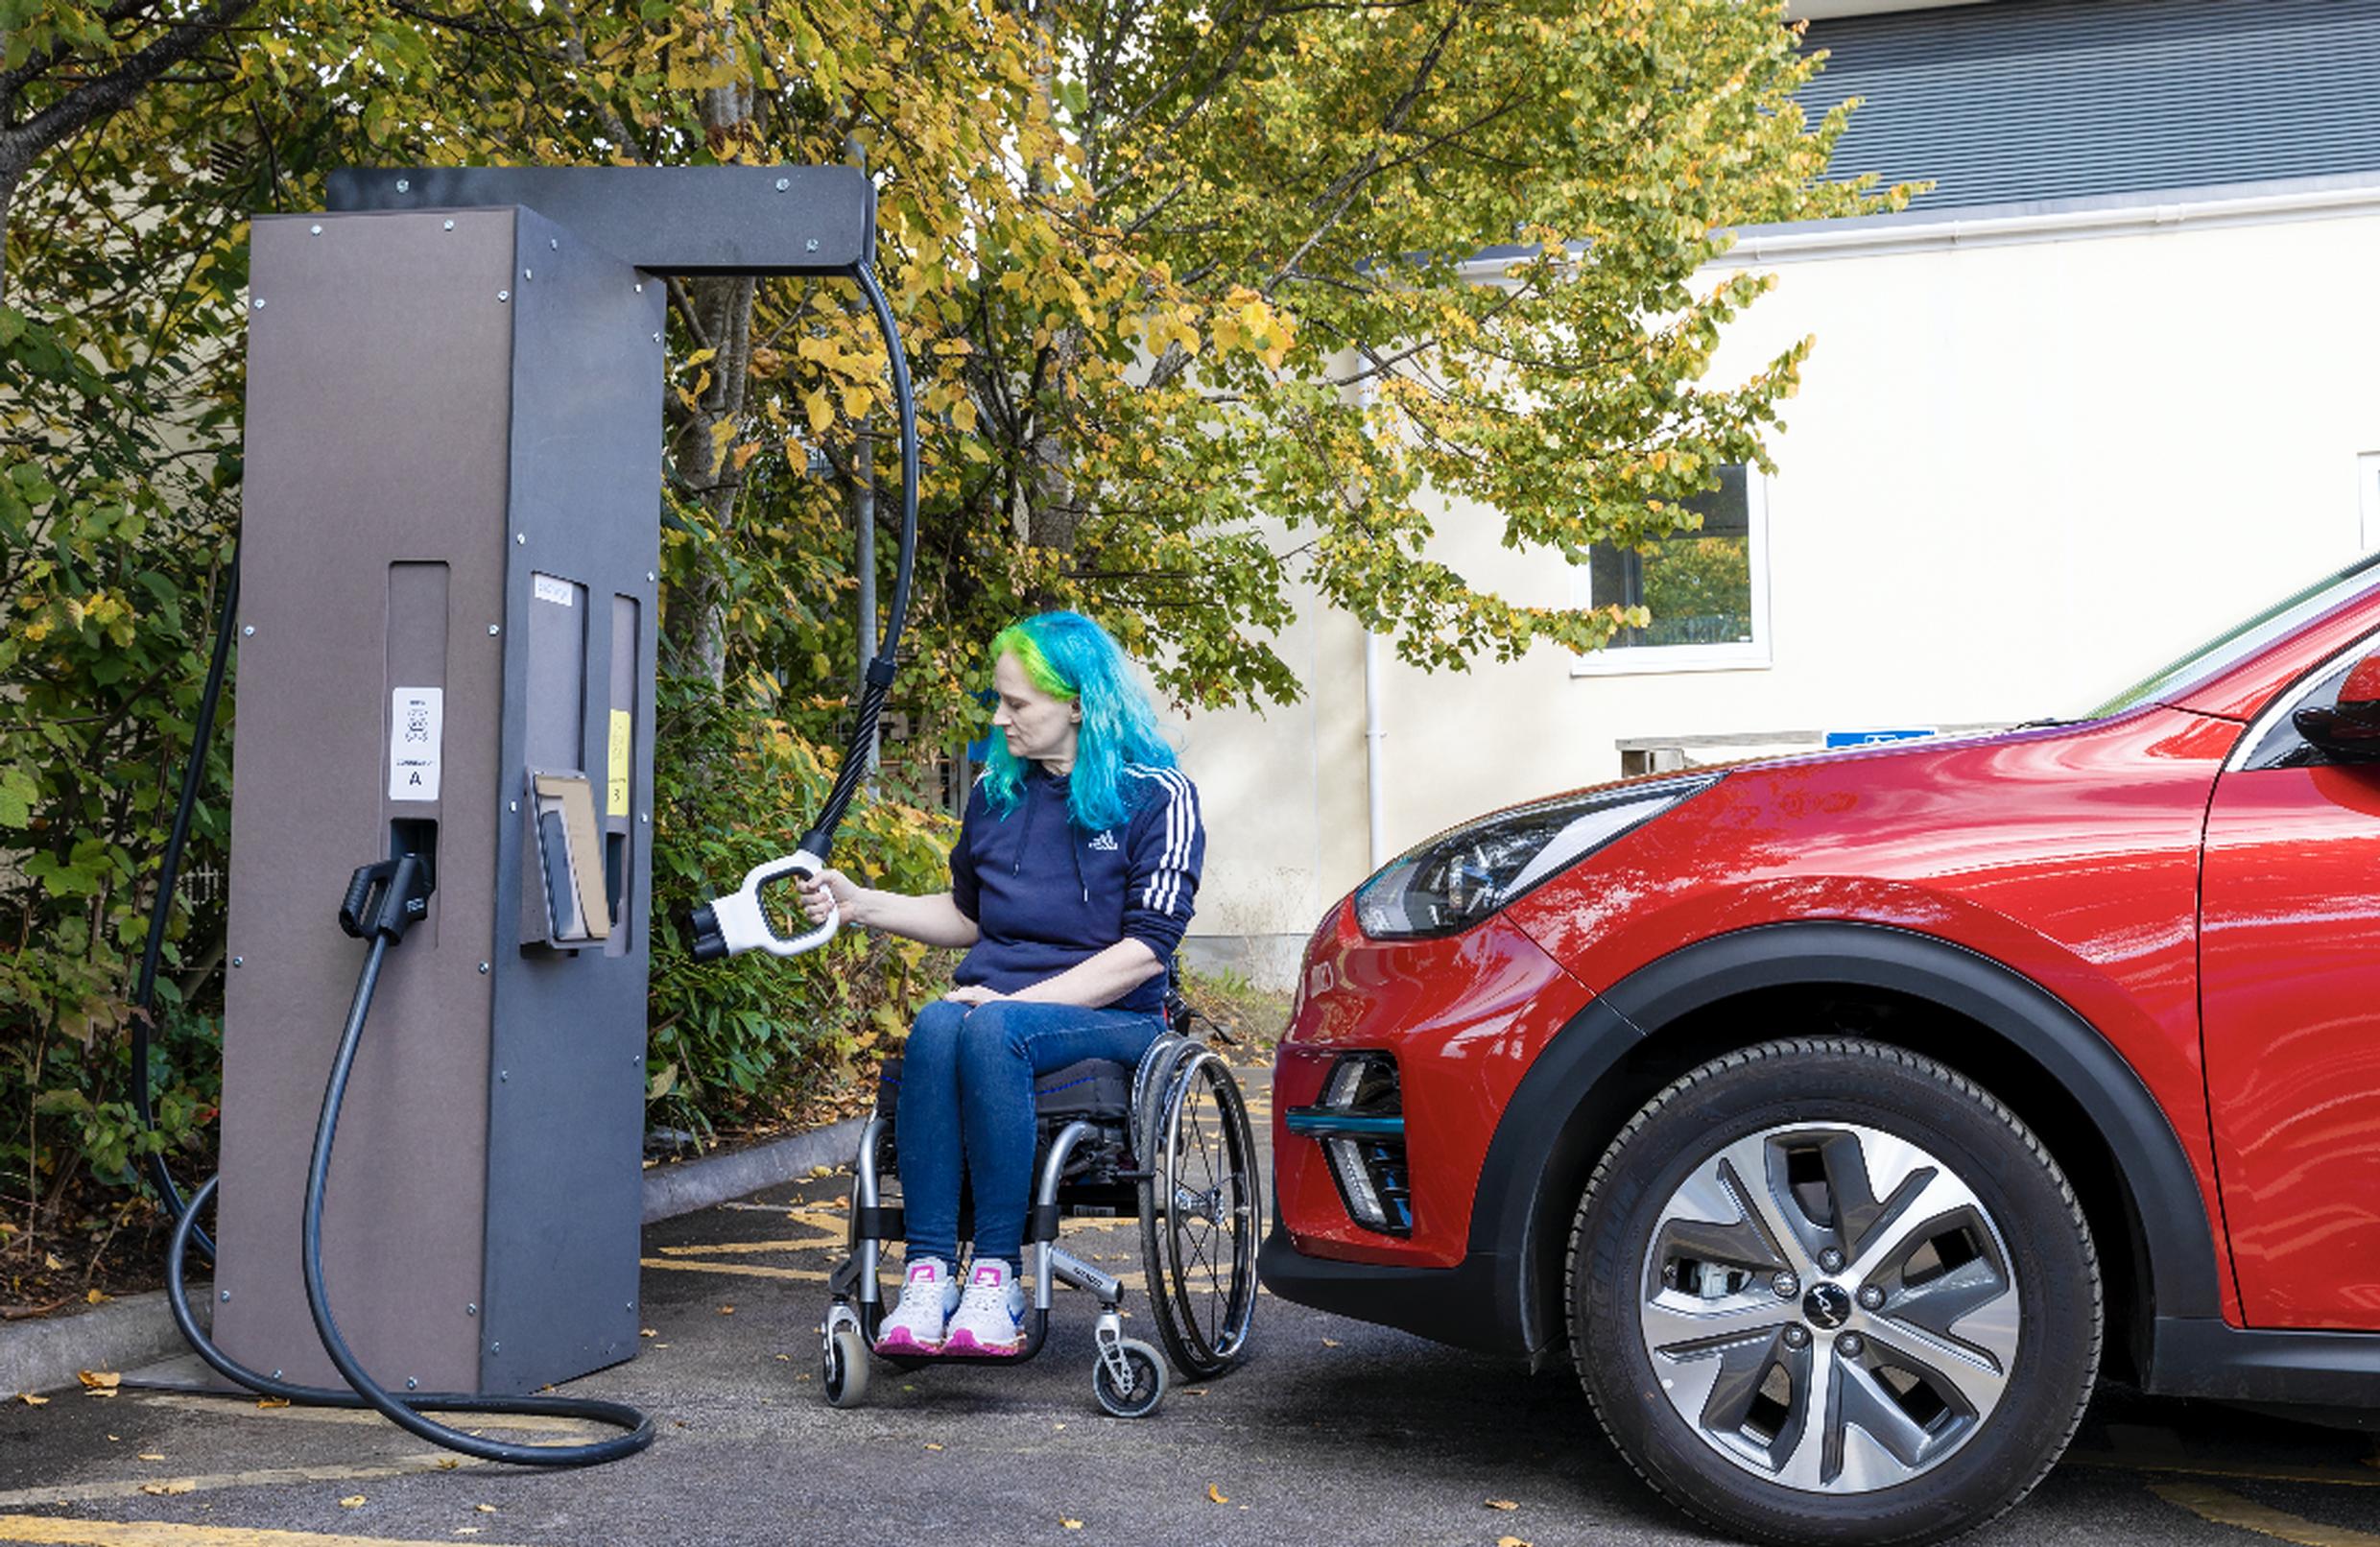 PAS 1899:2022 aims to support the building of an inclusive EV charging infrastructure in the UK